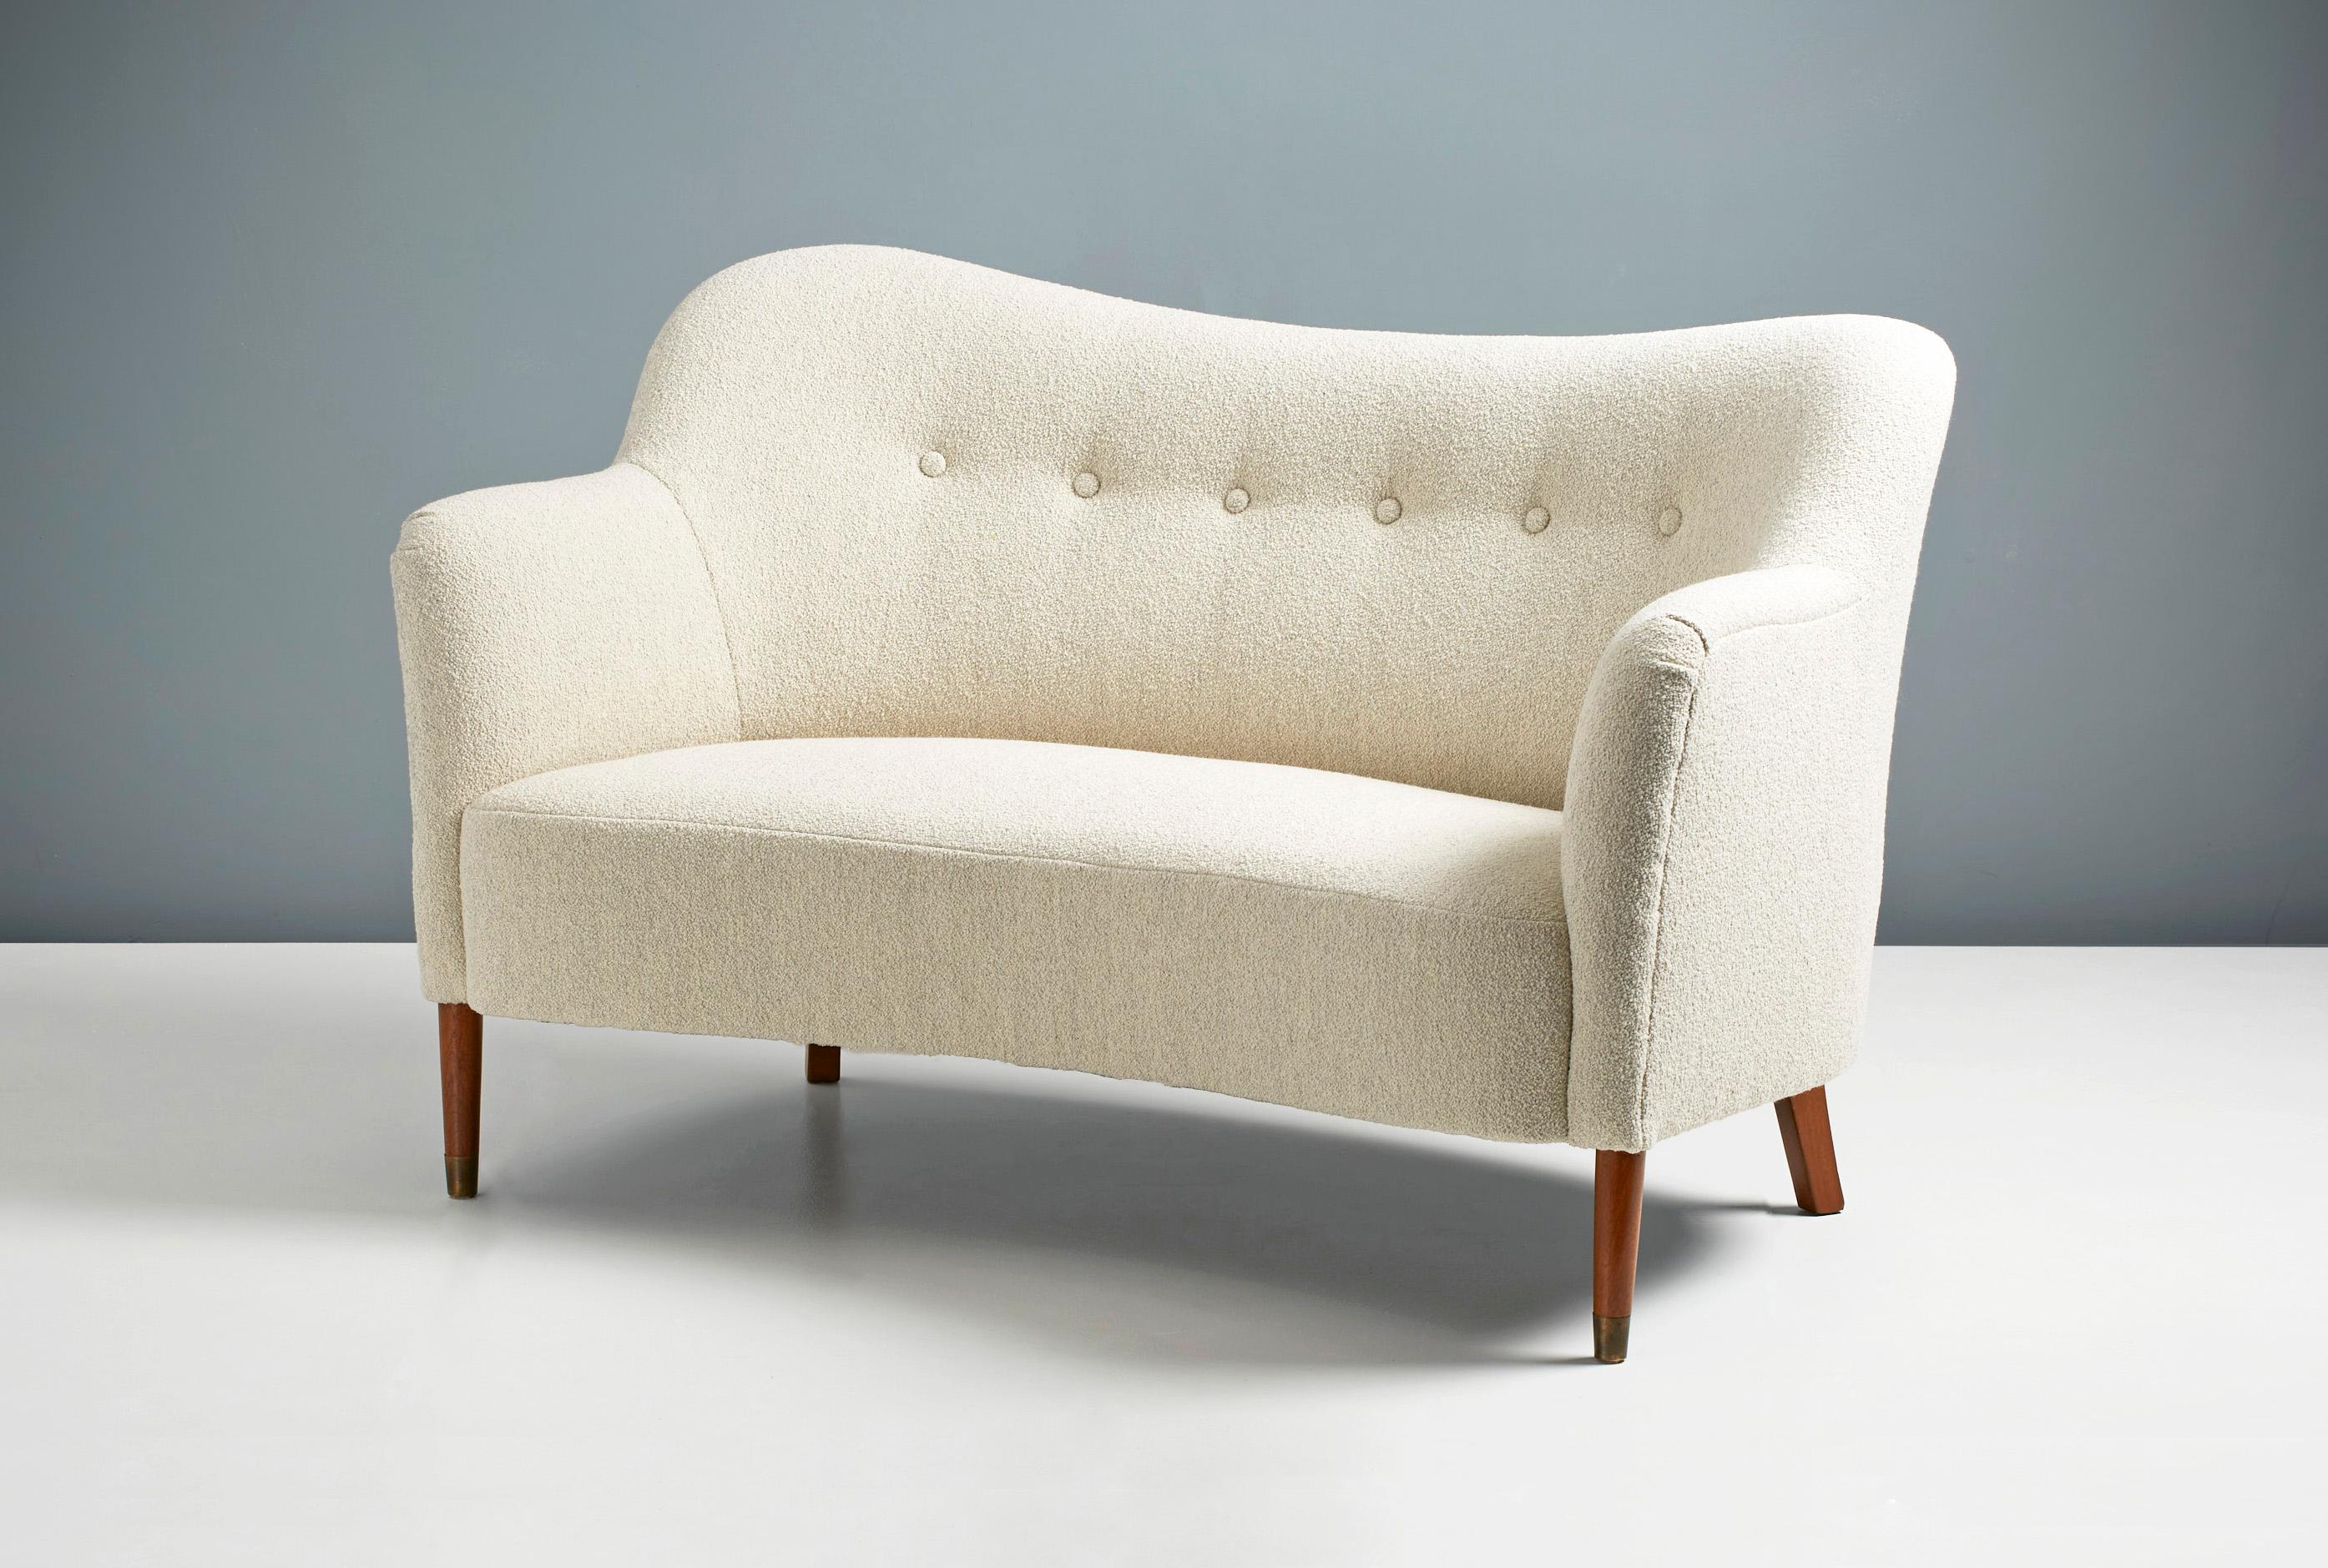 Danish Cabinetmaker

Curved Loveseat, c1950s

Two person love-seat sofa in the manner of Finn Juhl. Produced by an anonymous Danish cabinetmaker c1950s. The sofas has oak legs with patinated brass shoes and has been reupholstered in a stone